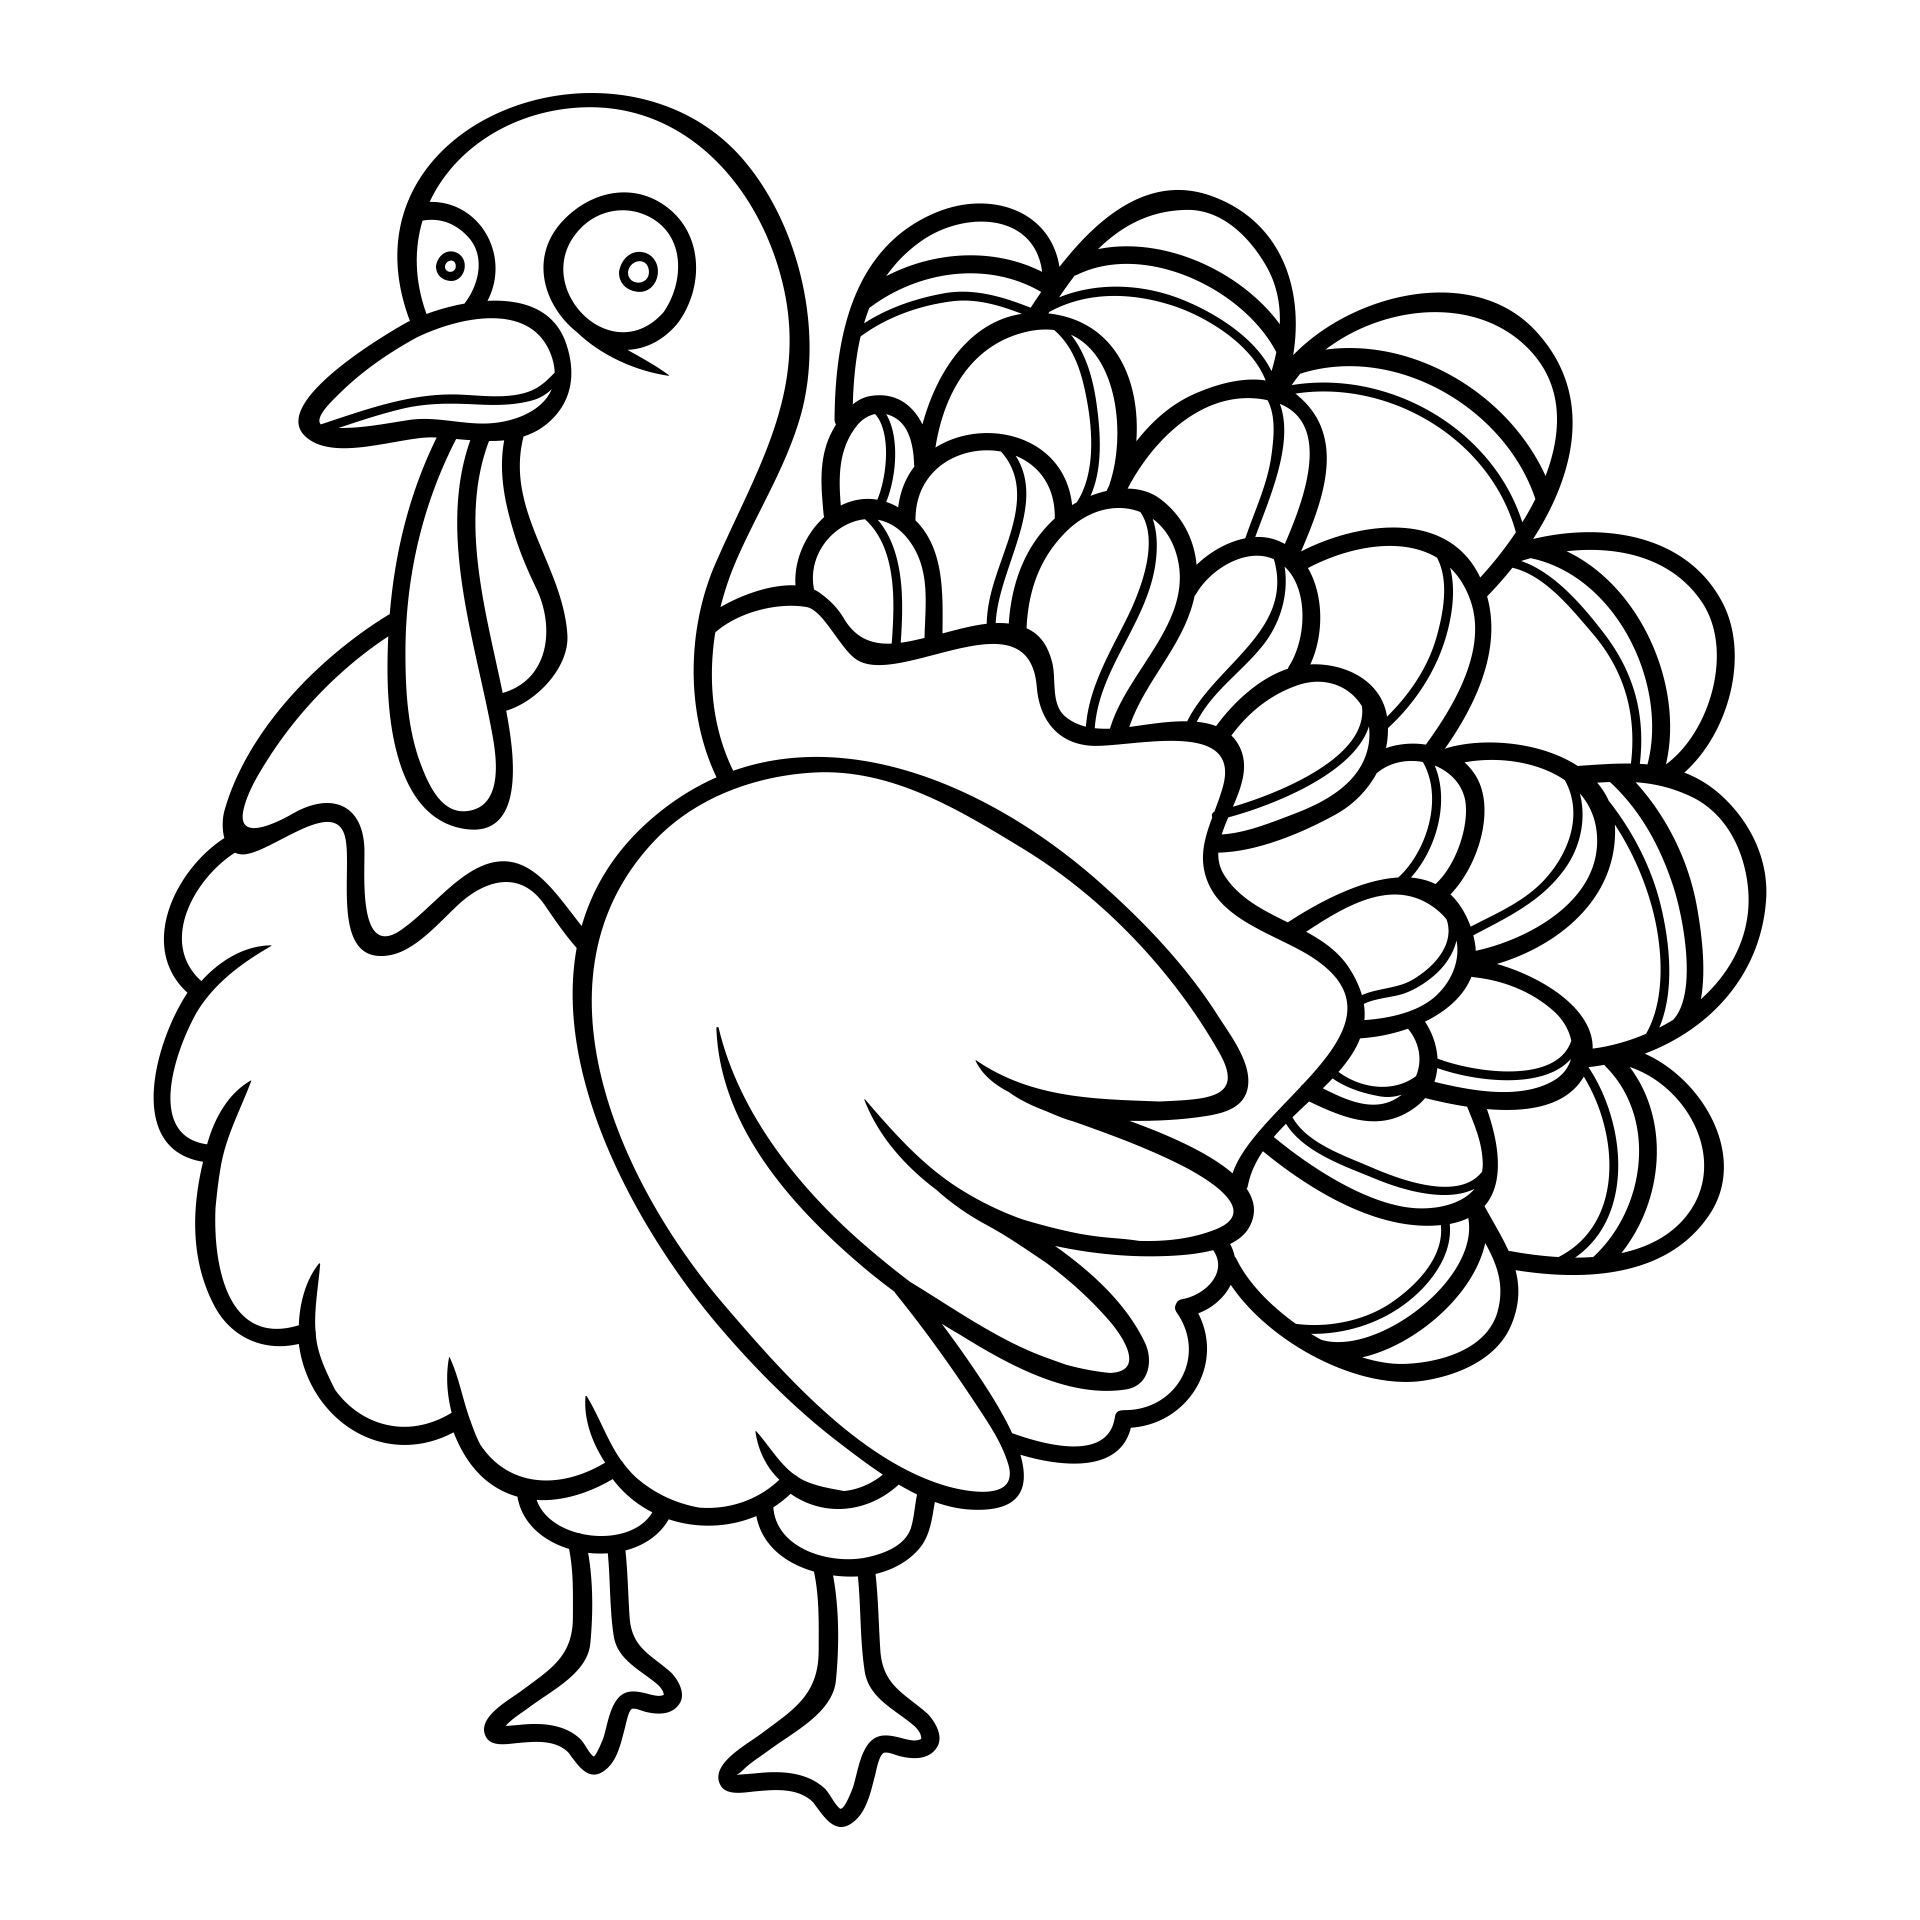 coloring-page-preschool-thanksgiving-crafts